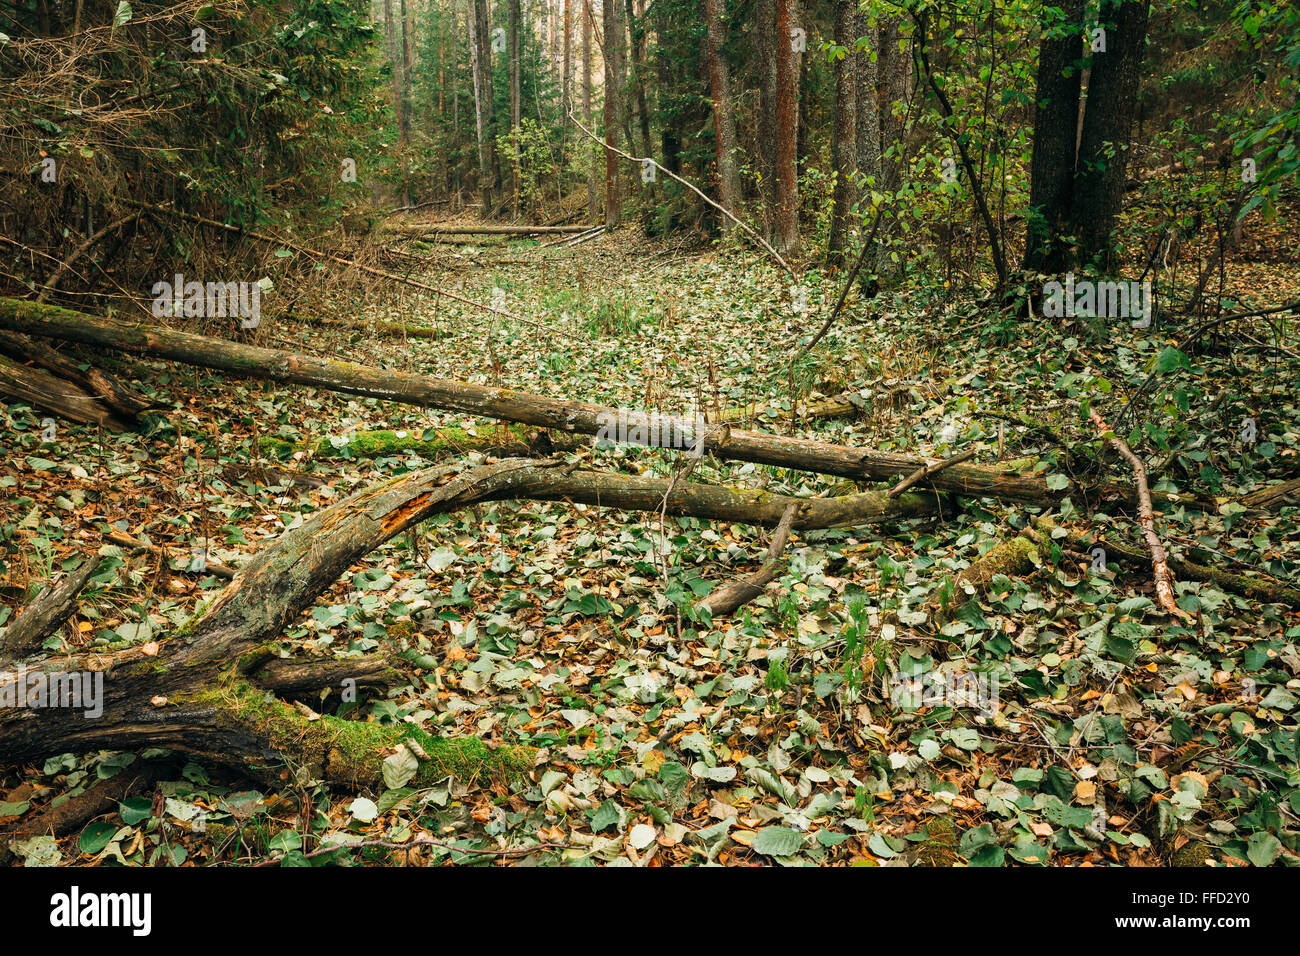 Wild autumn forest. Fallen trees in coniferous forest reserve. Stock Photo